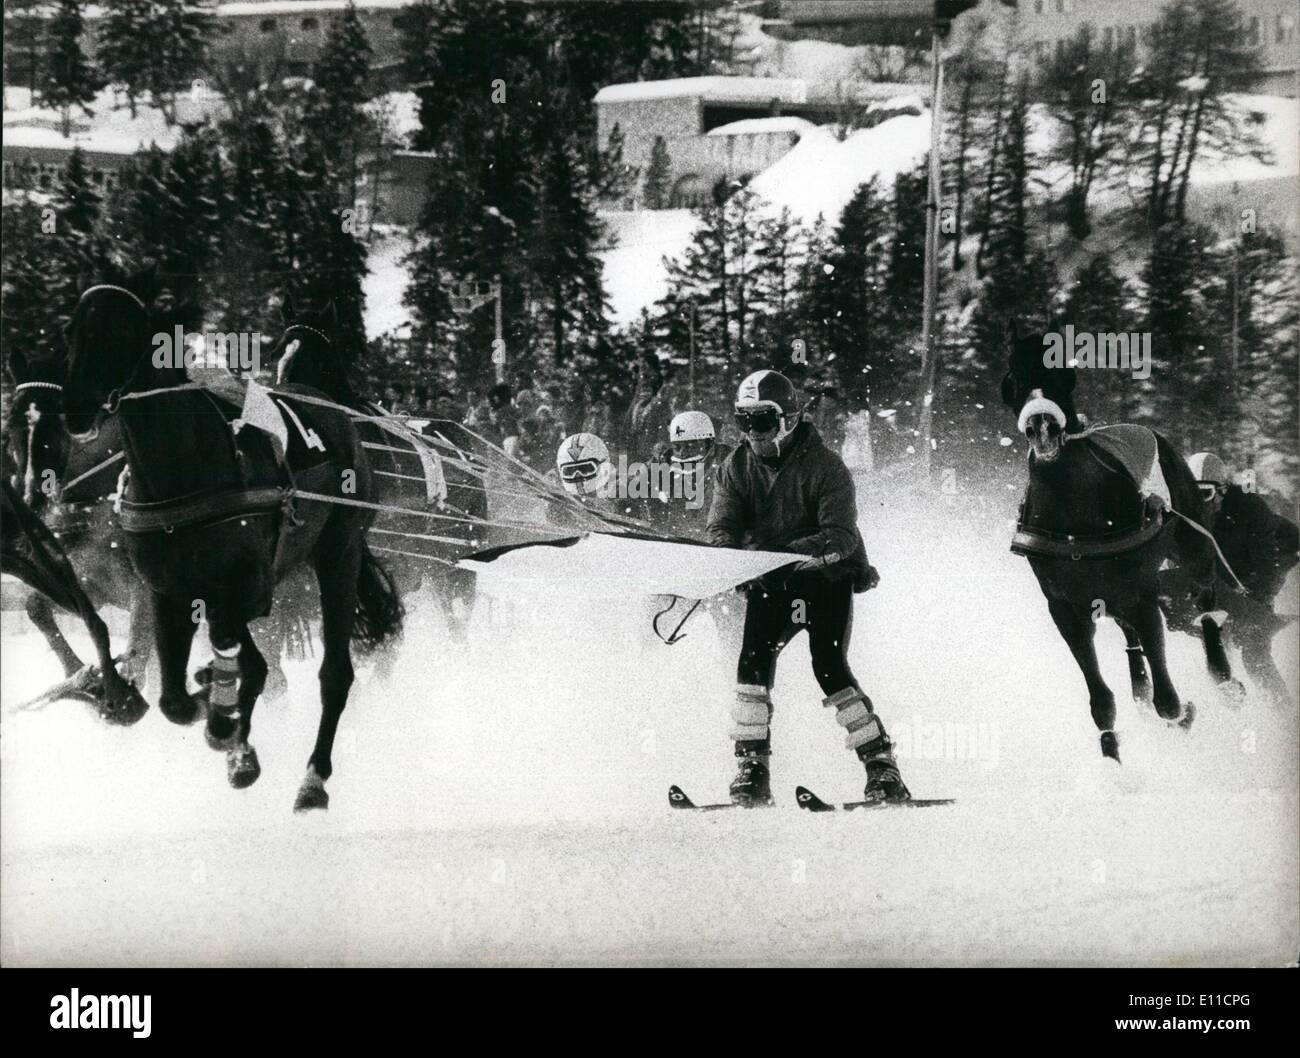 Feb. 02, 1977 - Micture of Horses-race and Ski-race: As every year this weekend at the famous swiss winter-sport place St. Moritz Th~~e was again the Ski- ''Joring''- competition, at what the ski- runners are drawn by horses. It's a well-known sport at St. Moritz and is atmired every year by many guests from Switzerland and abroad. Stock Photo